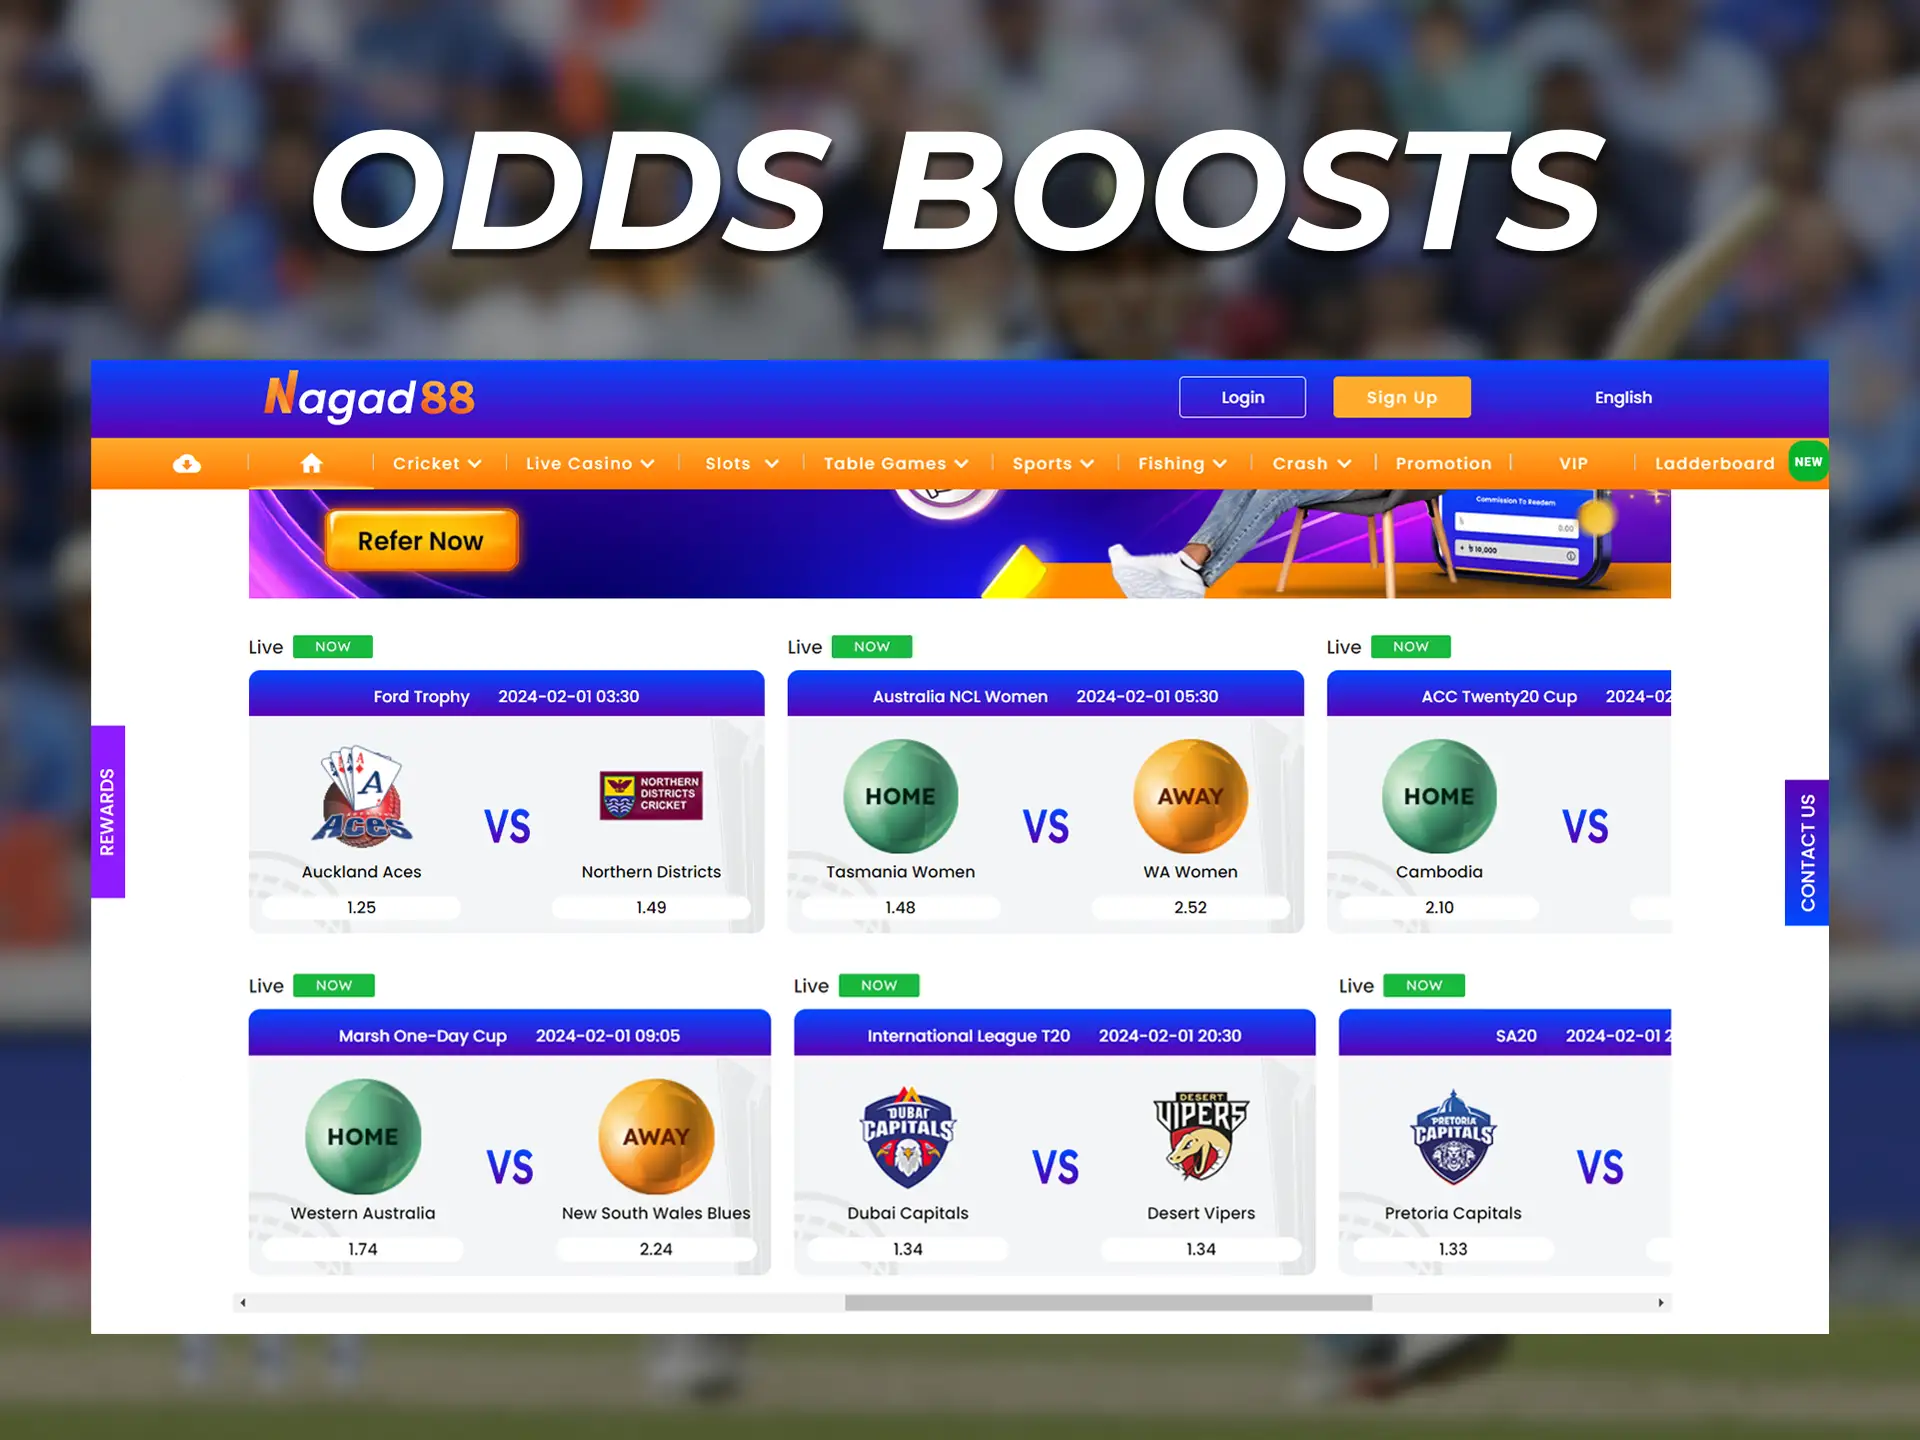 Watch out for odds boosts at bookmakers and take advantage of this offer.